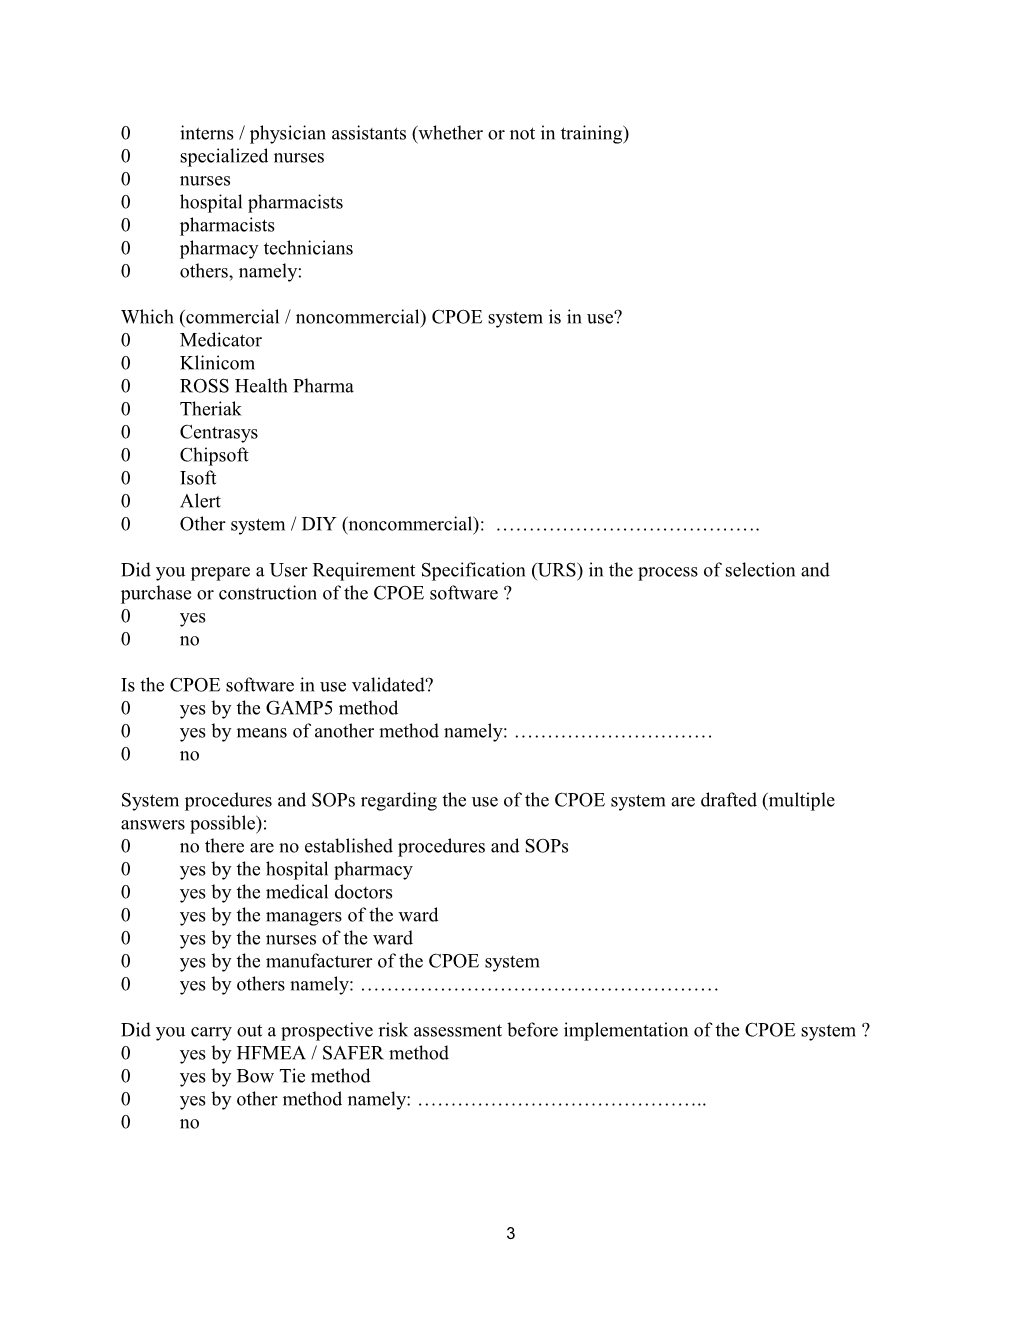 Appendix 1: Questionnaire Used in the Study (Translated from Dutch)